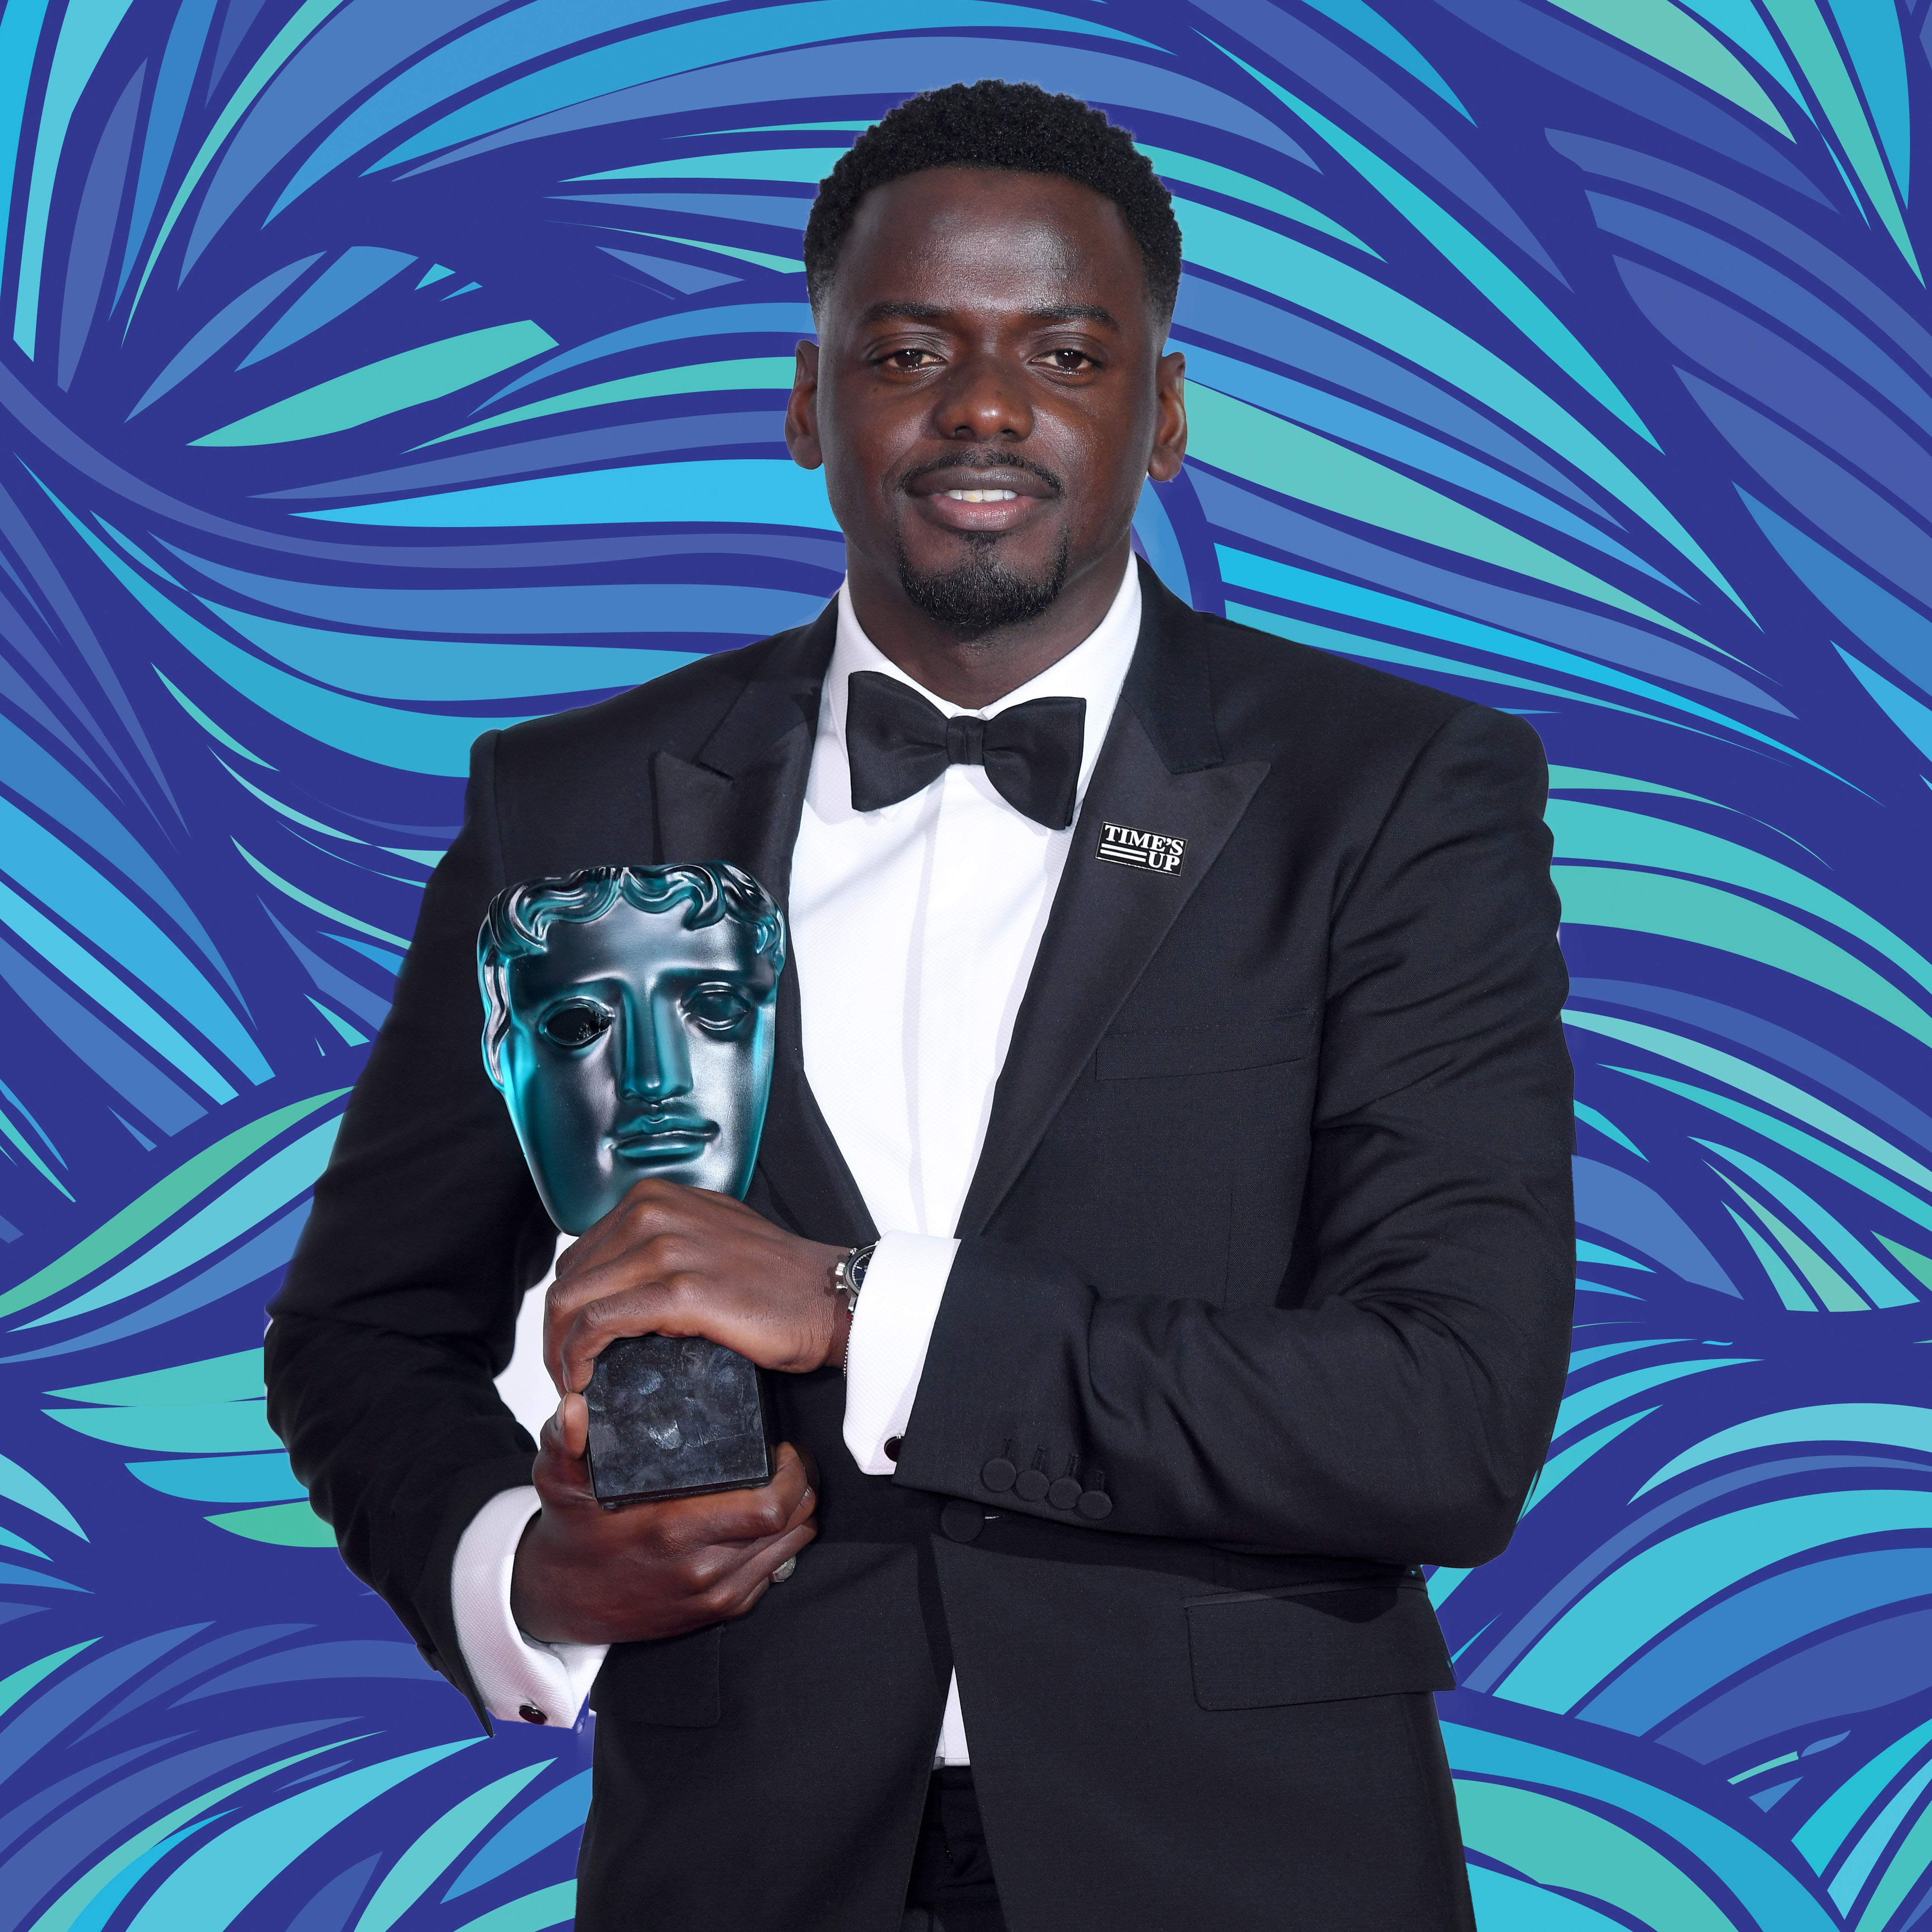 Daniel Kaluuya Emotionally Thanks His Mother During BAFTA Acceptance Speech: 'You're The Reason Why I'm Here'
